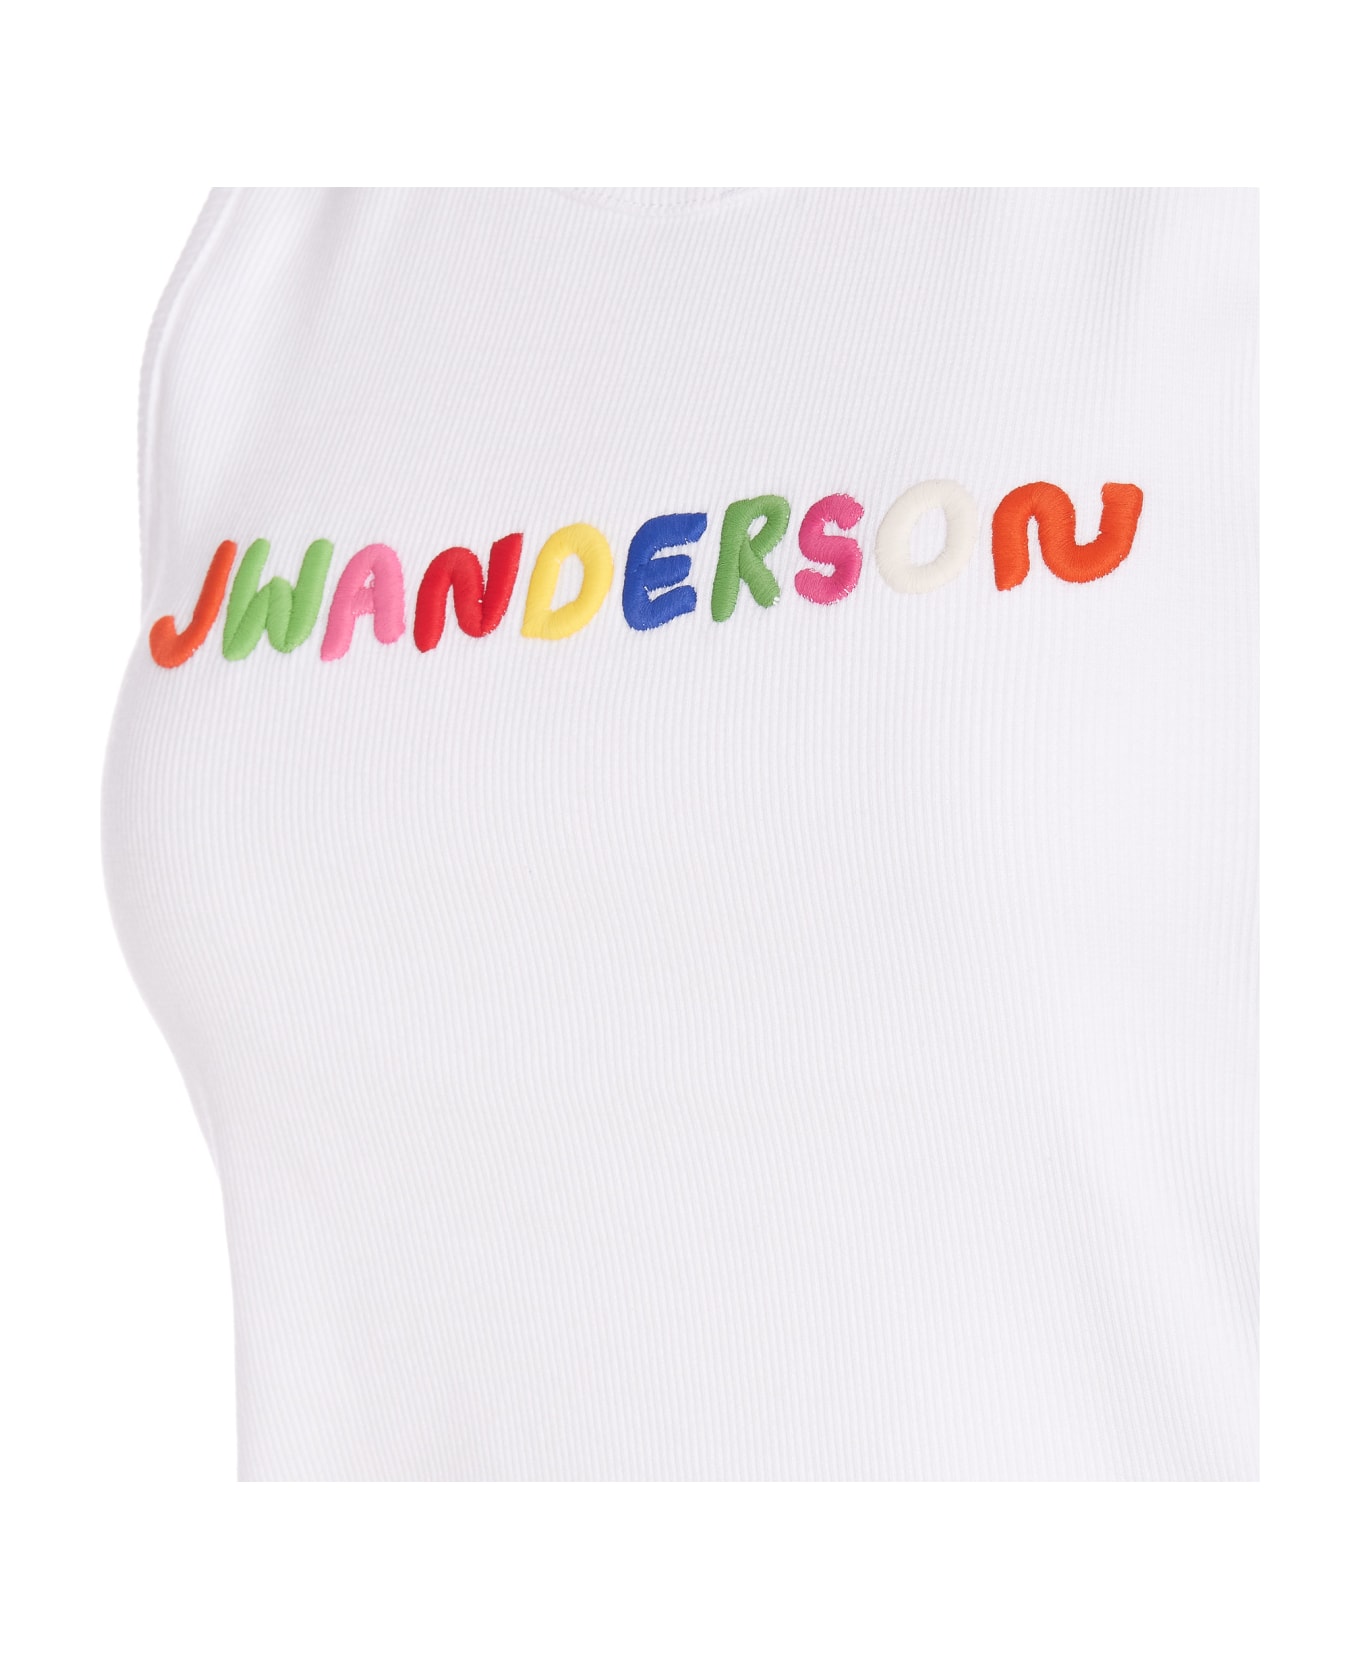 J.W. Anderson Logo Embroidery Tank Top - White タンクトップ